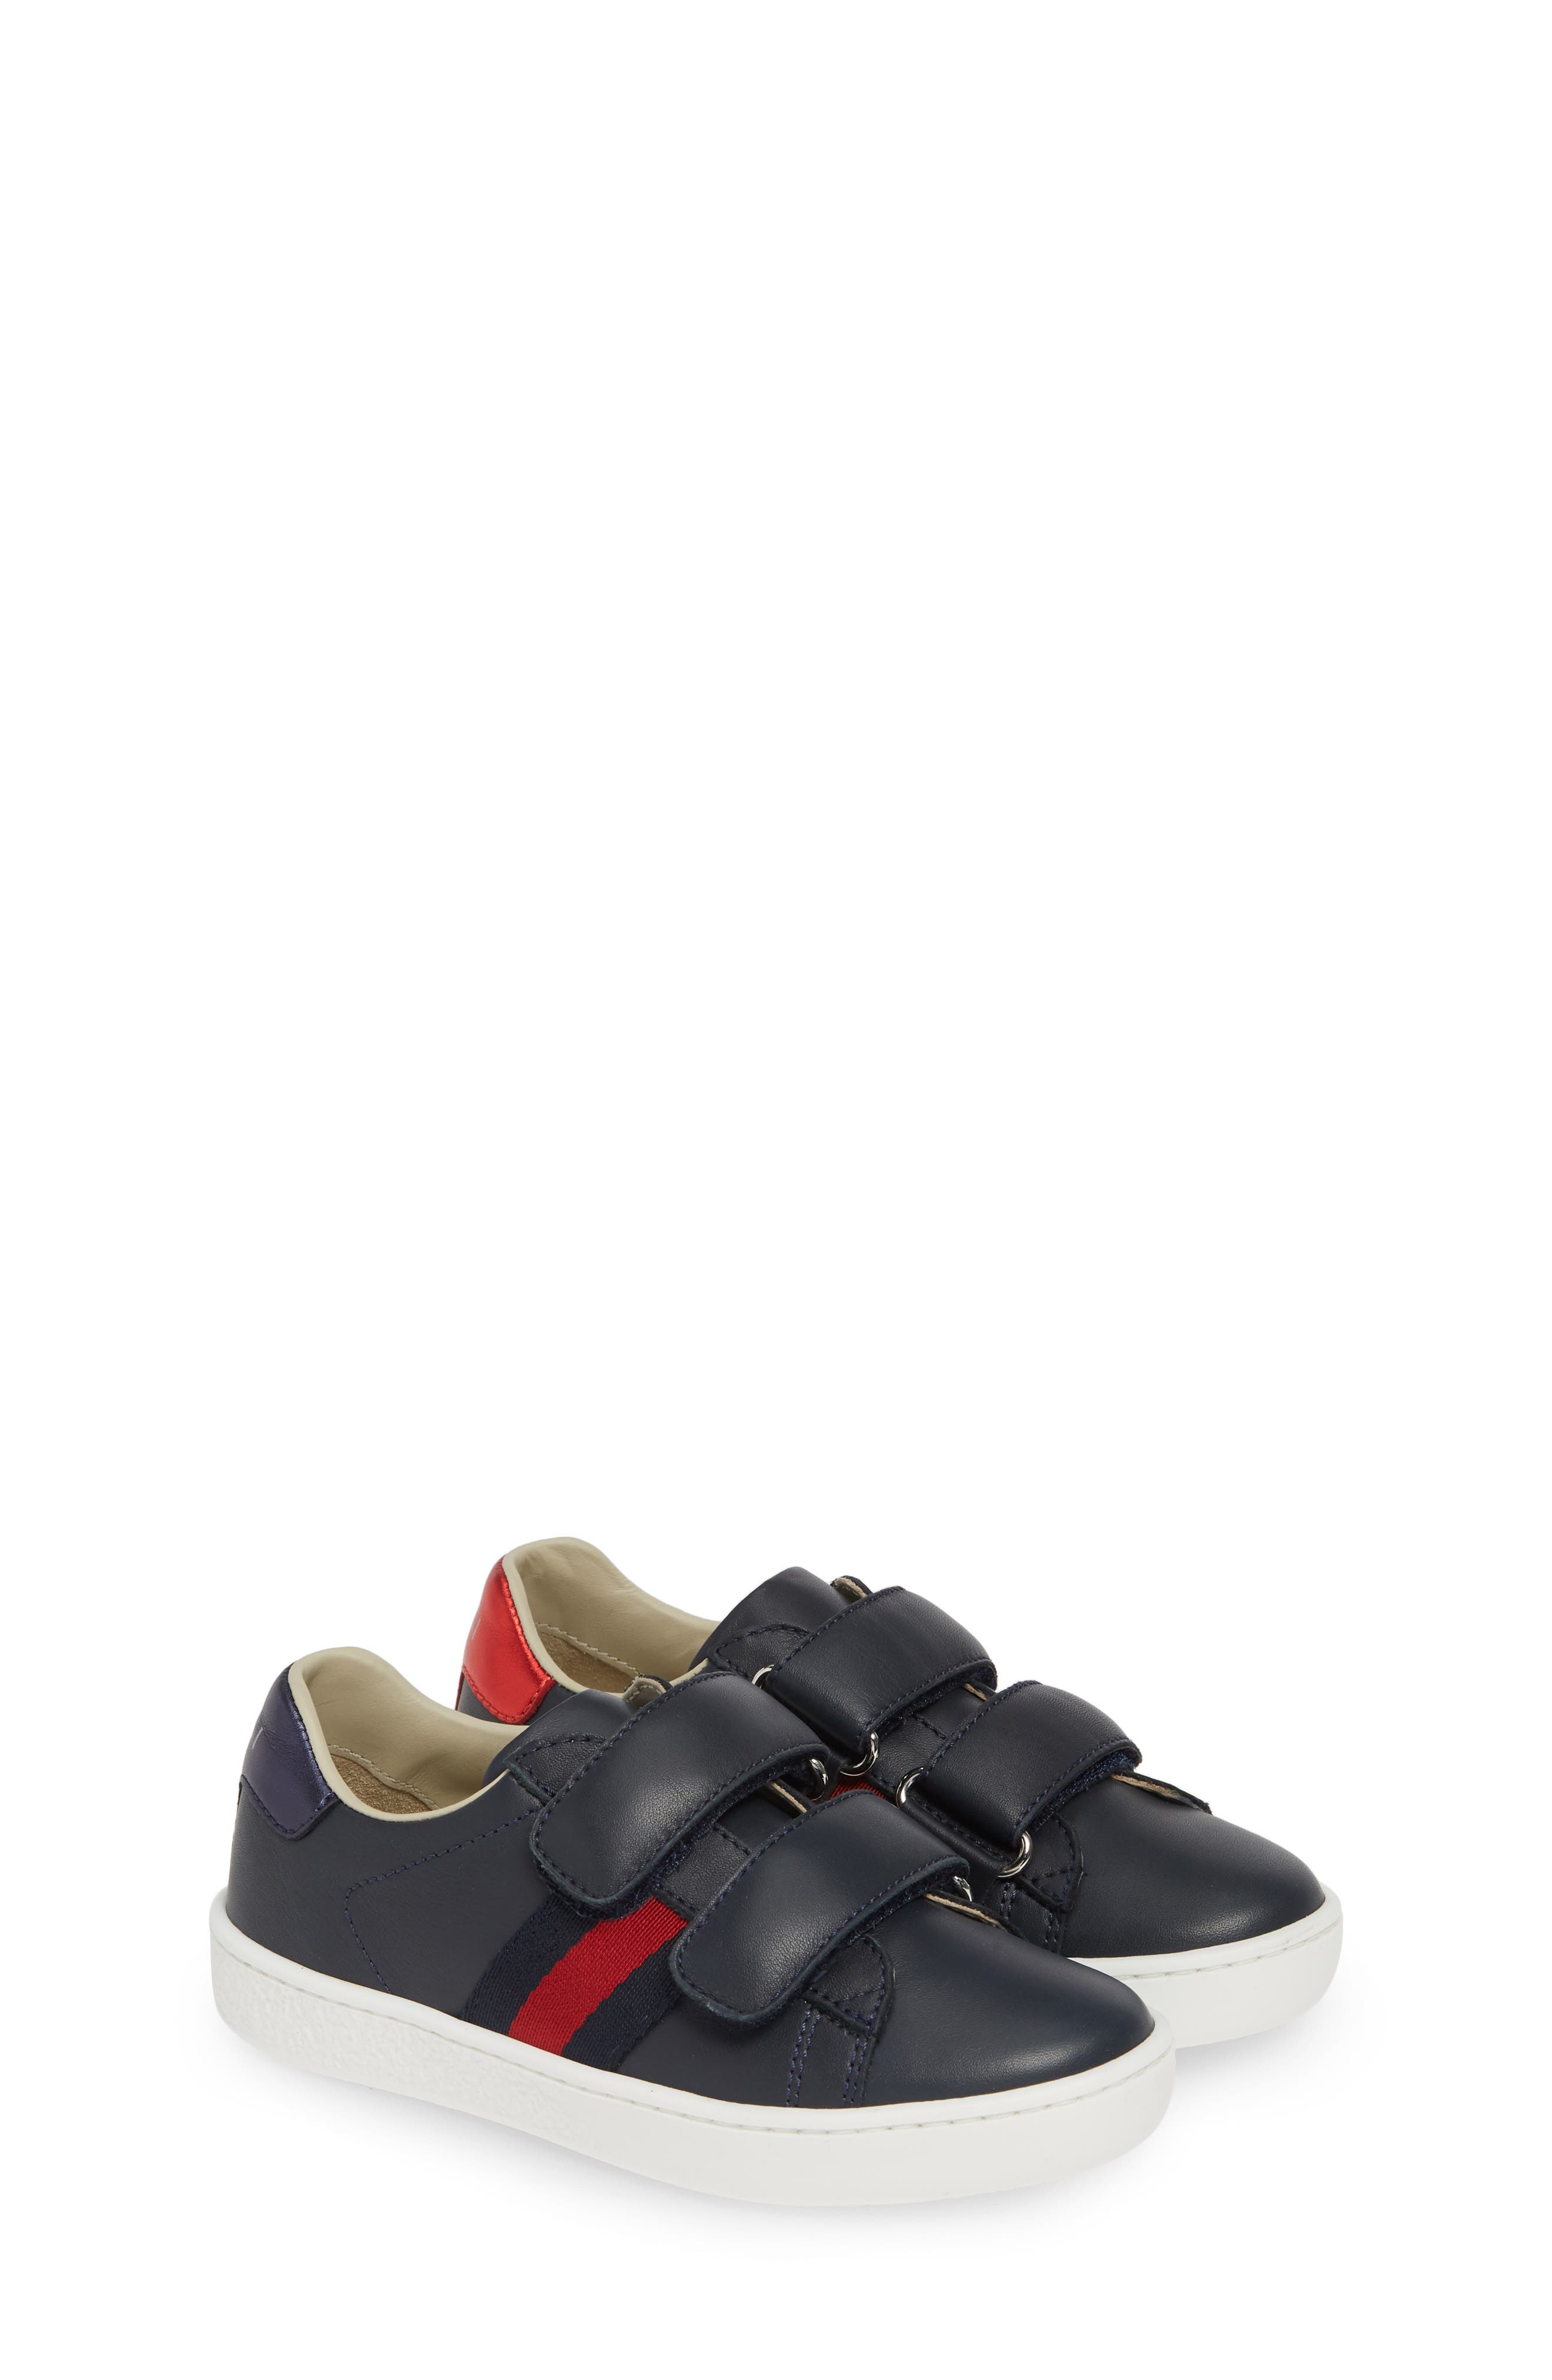 Kids' Gucci Shoes | Nordstrom